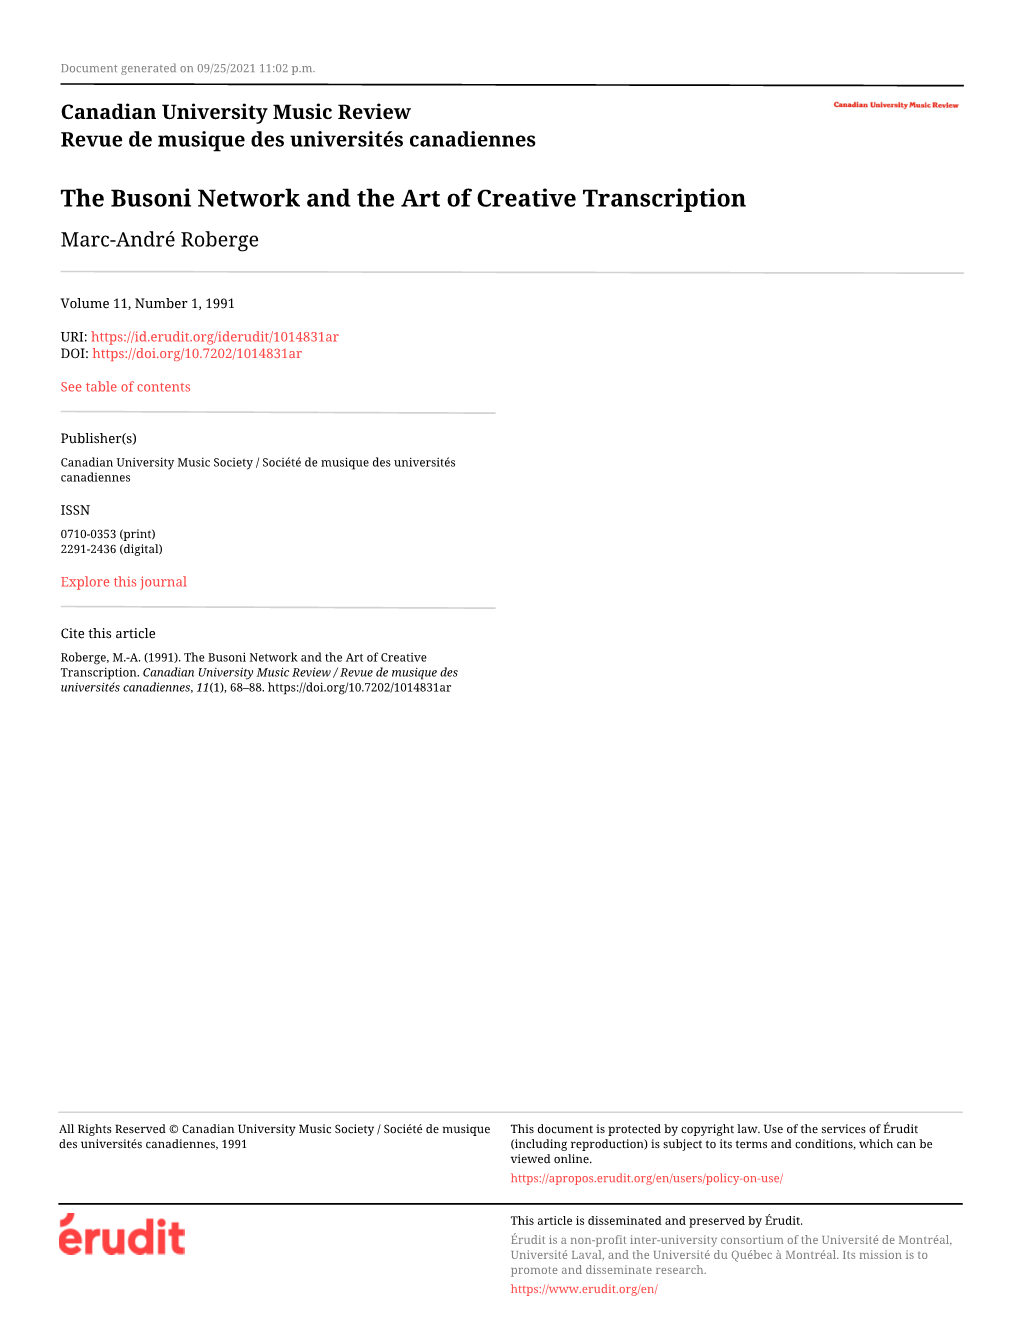 The Busoni Network and the Art of Creative Transcription Marc-André Roberge